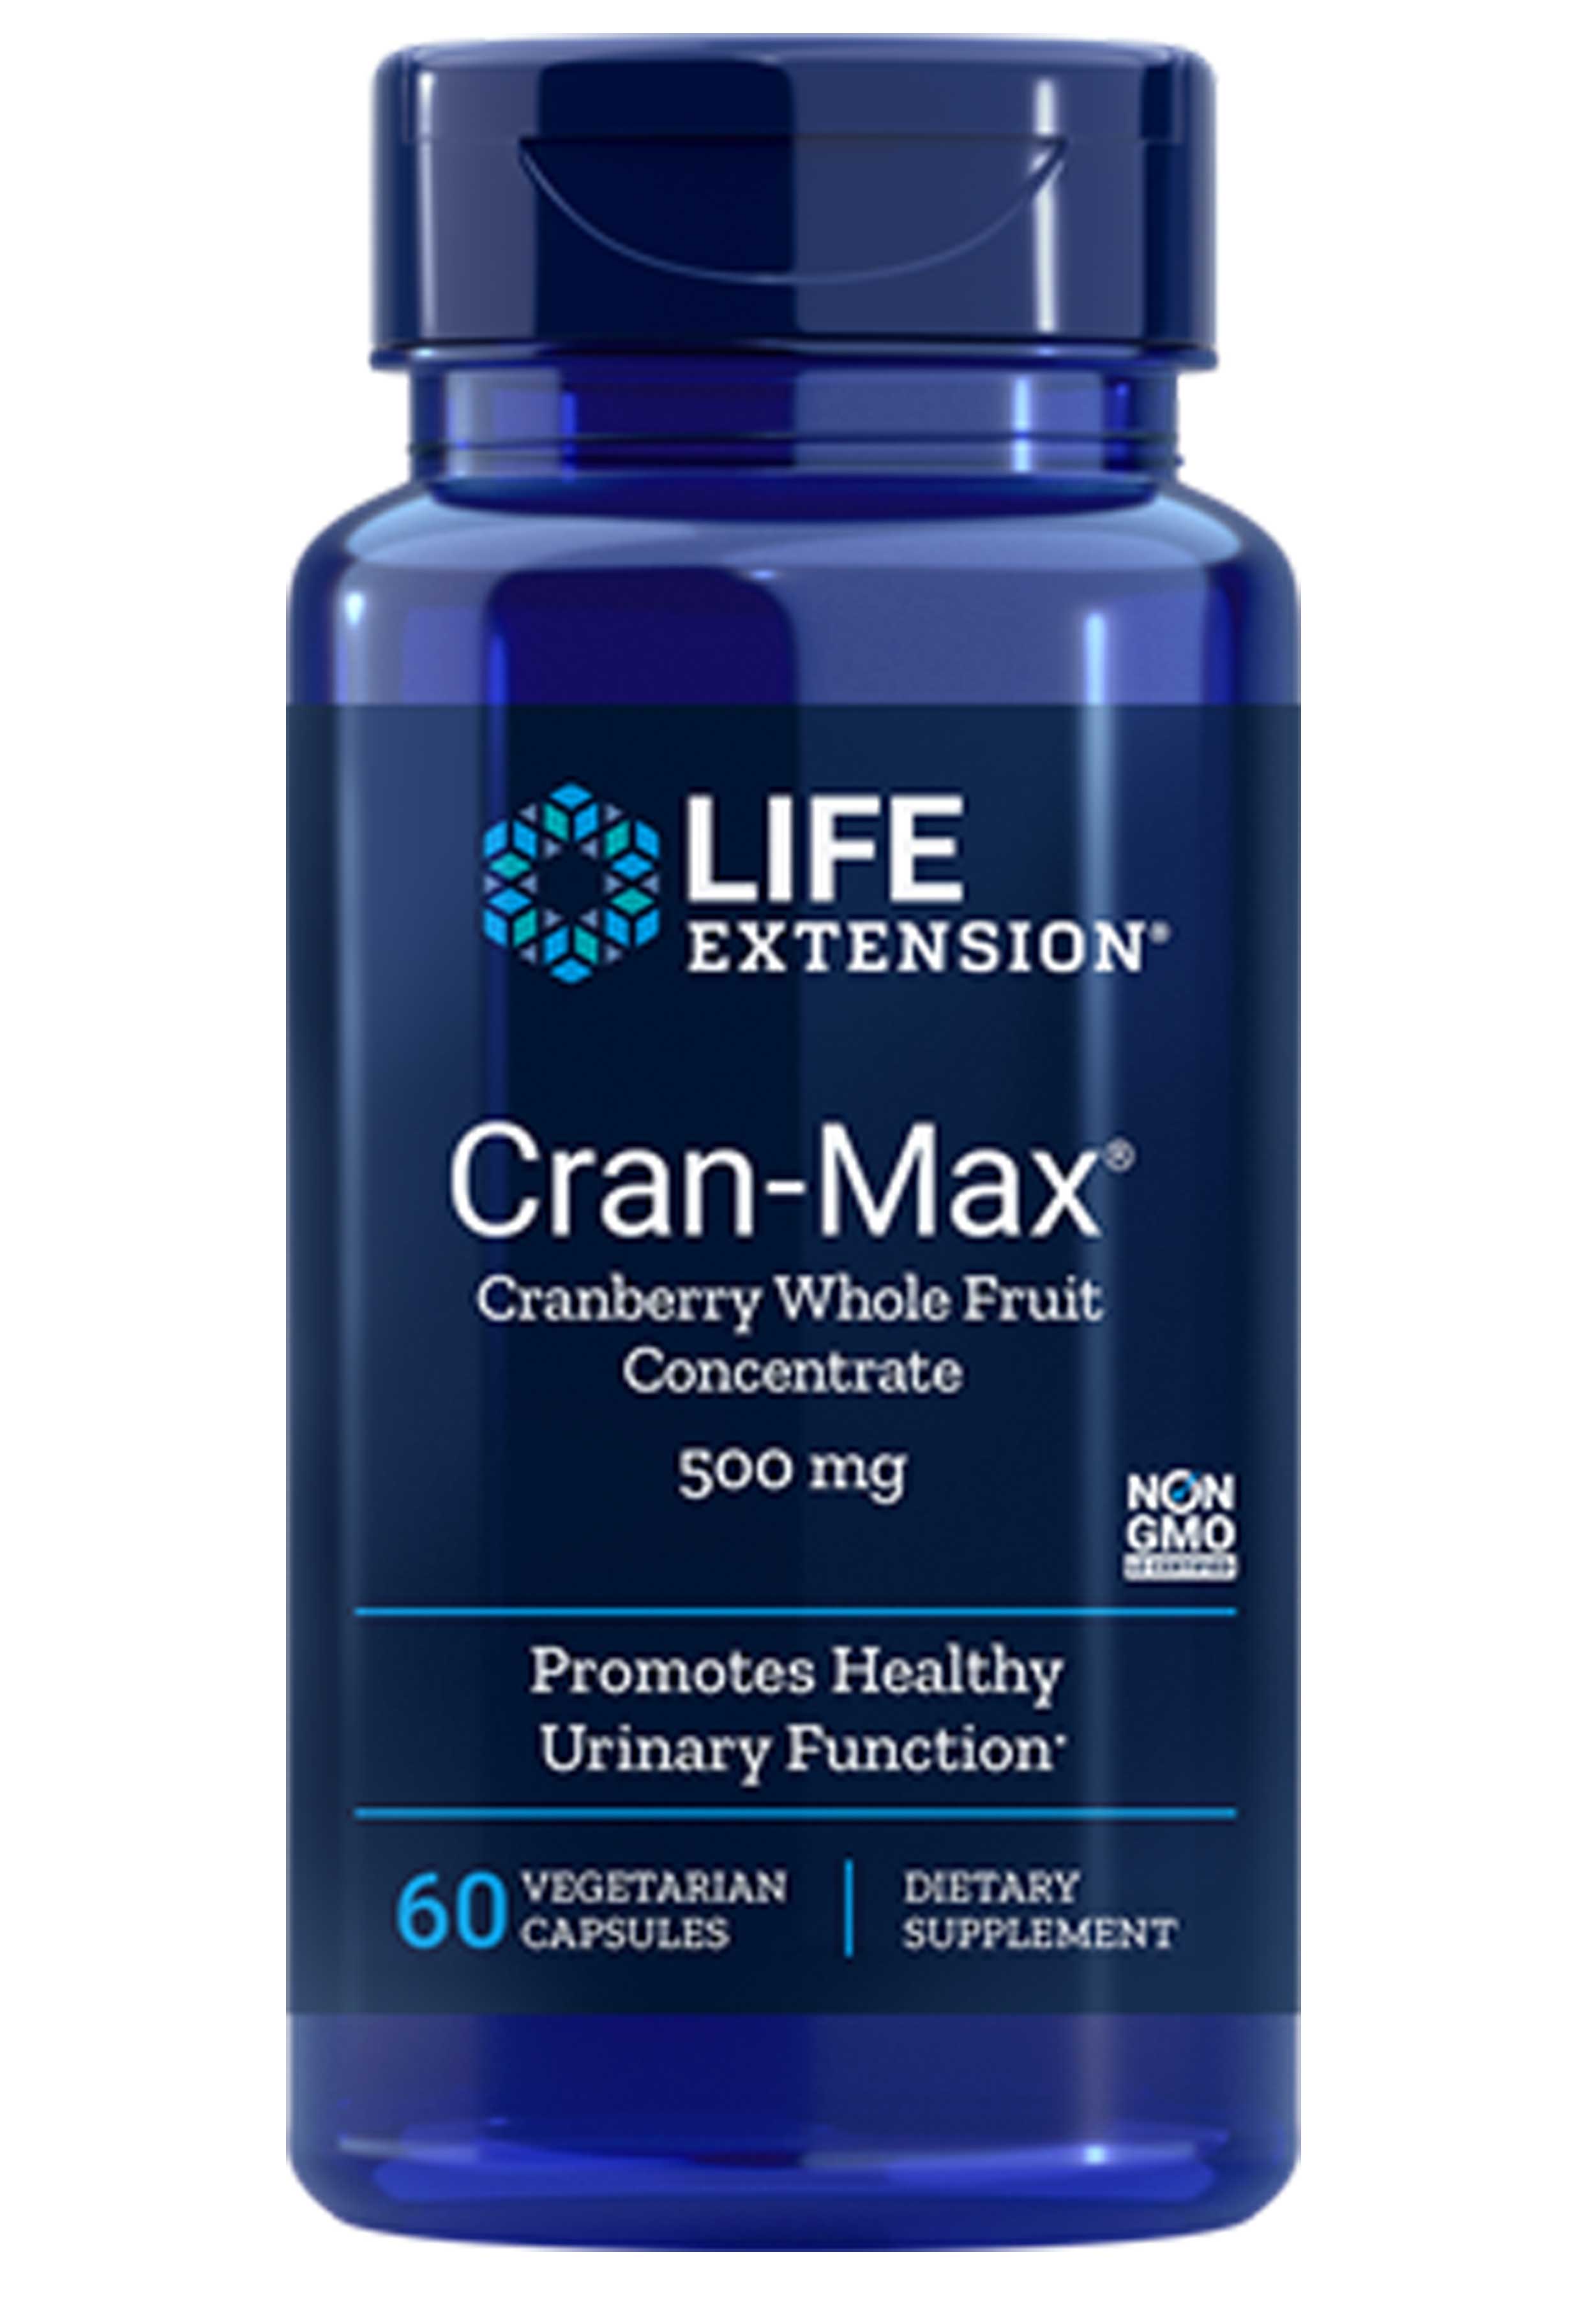 Life Extension Cran-Max Cranberry Whole Fruit Concentrate